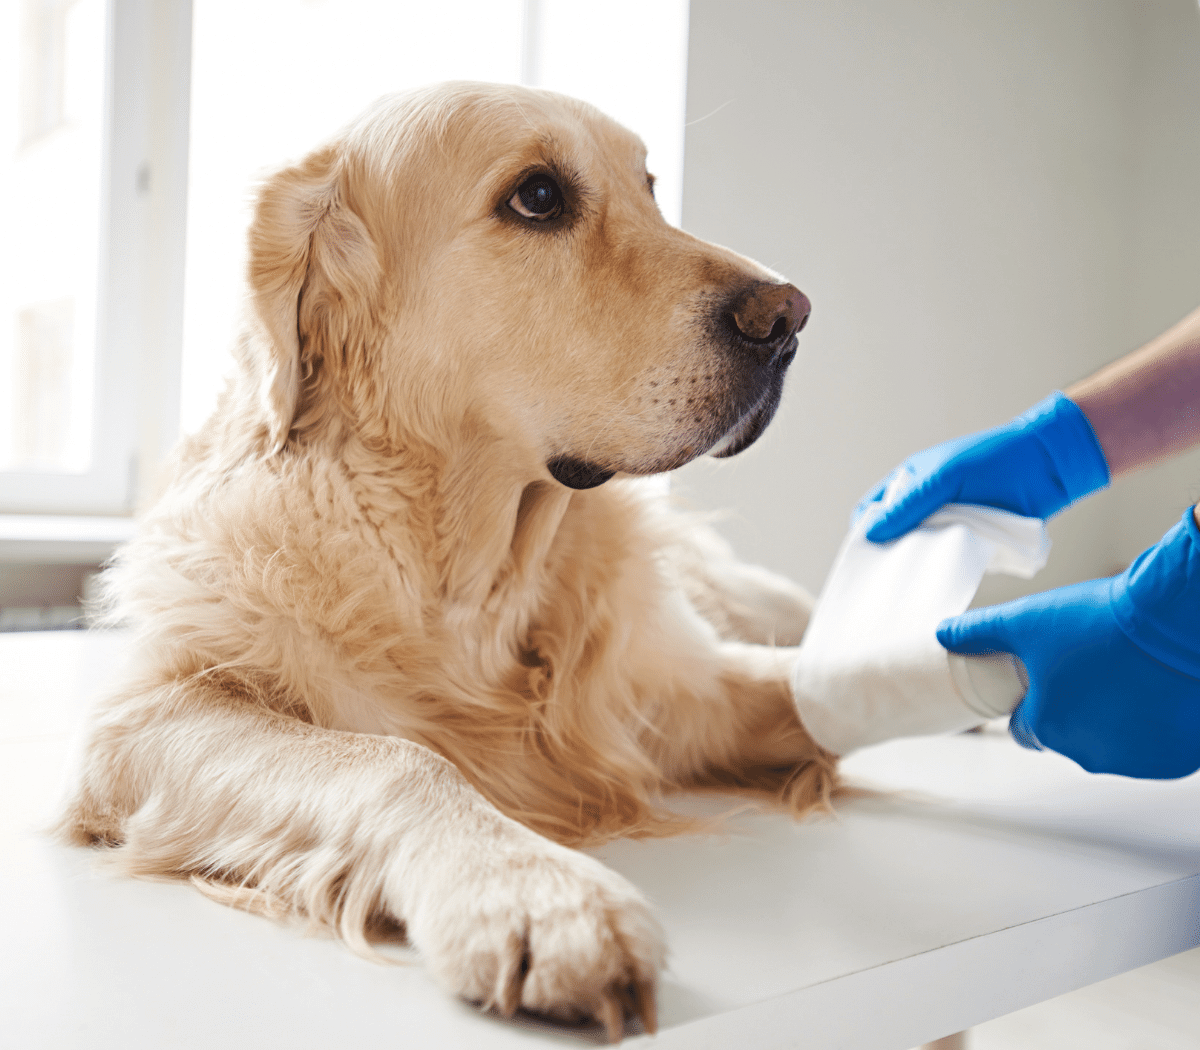 Veterinarian care for dog leg injuries